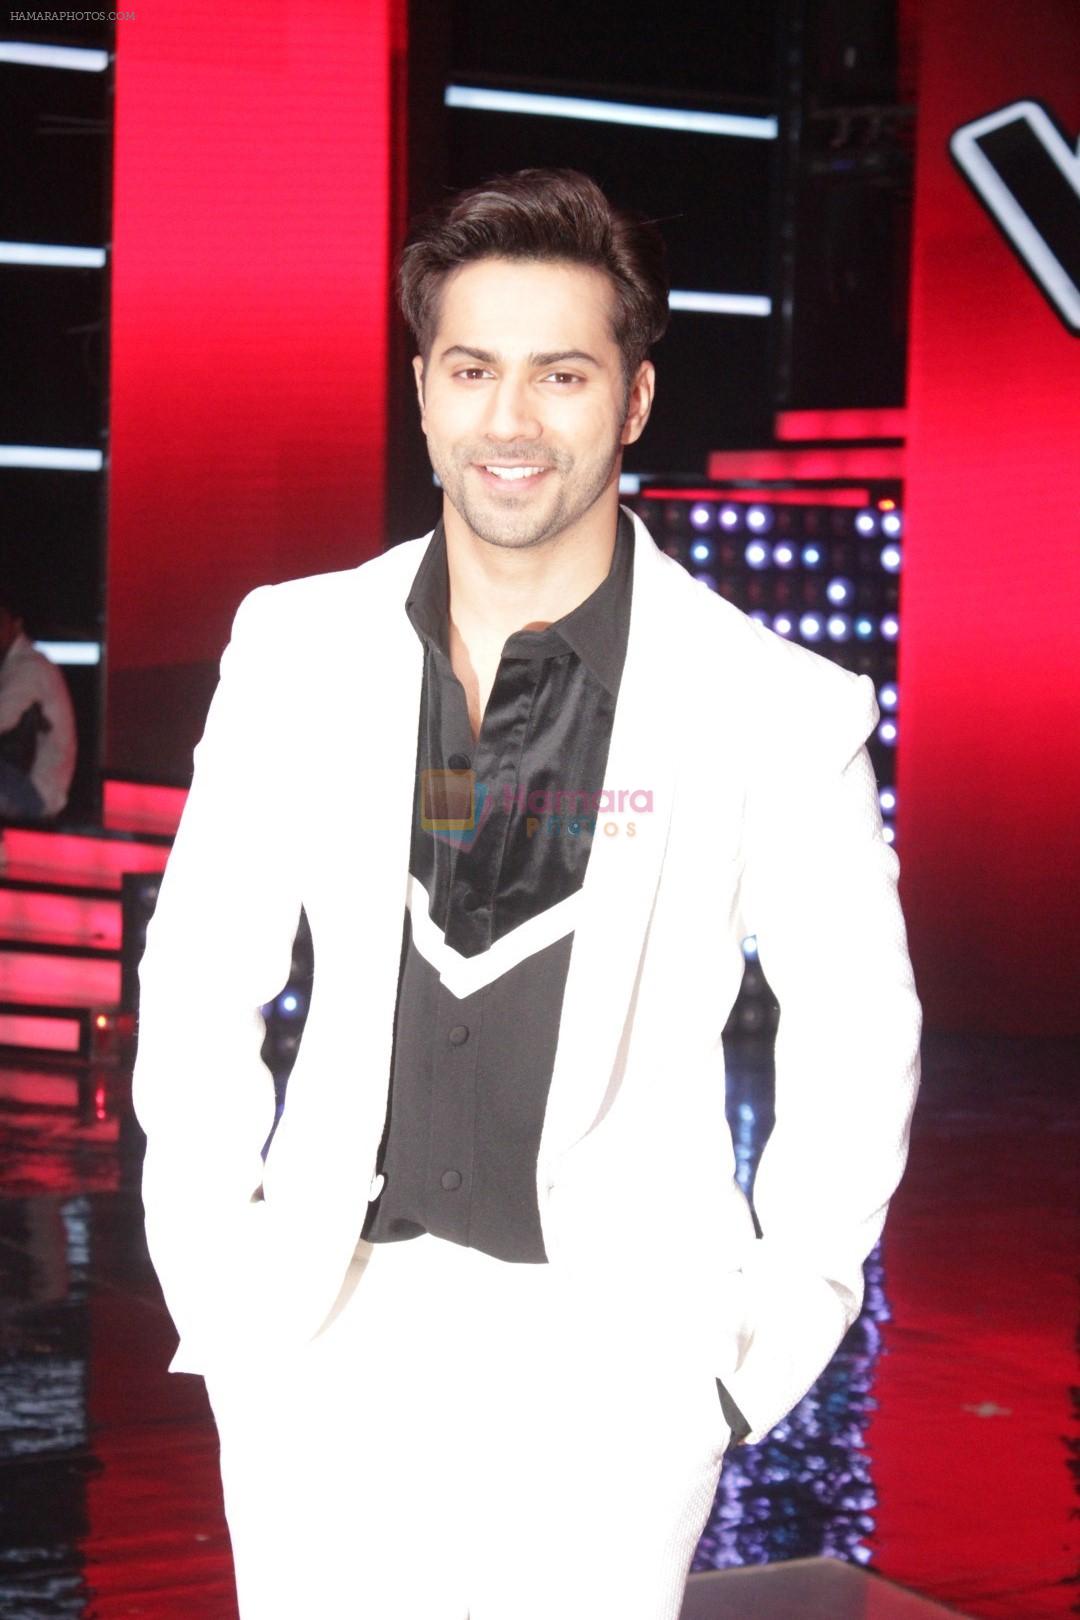 Varun Dhawan promote Badrinath Ki Dulhania on the sets of Voice of India on 1st March 2017